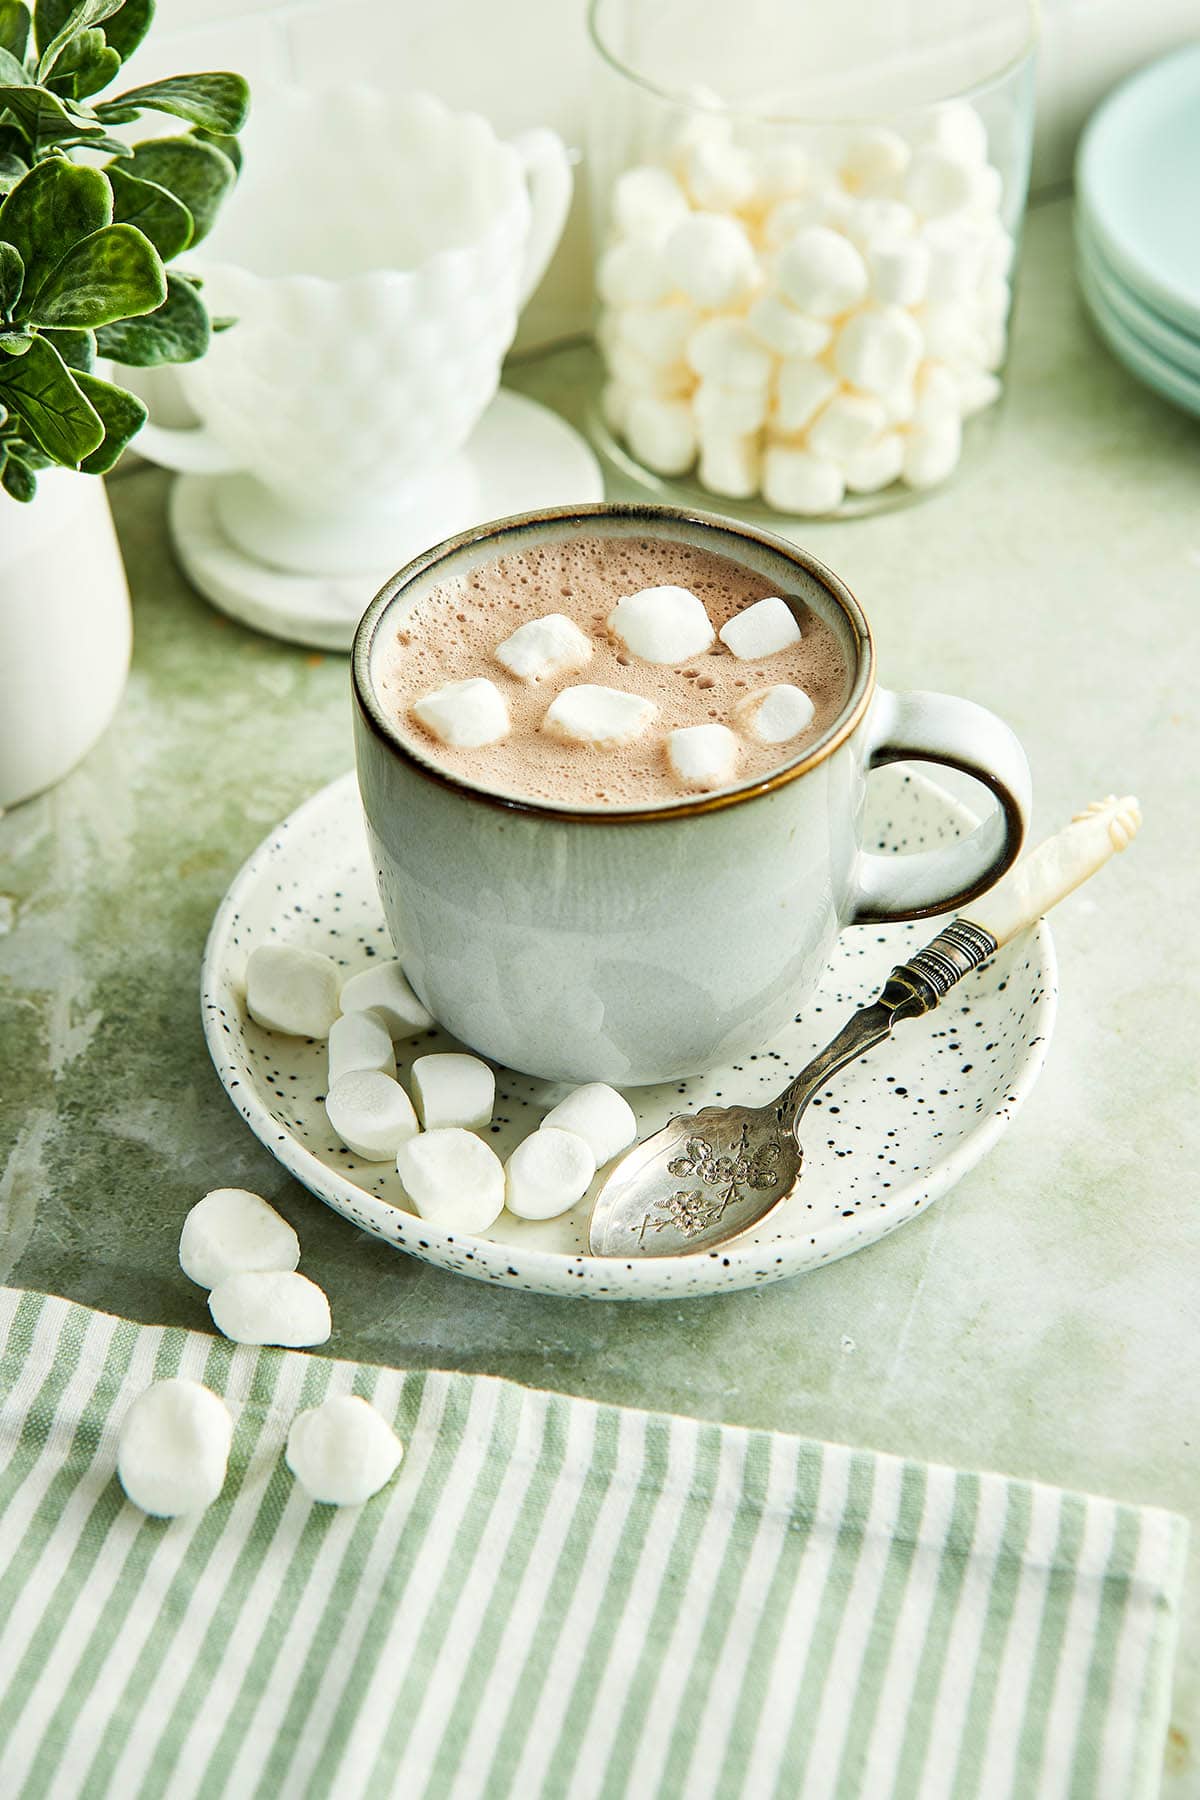 A mug of how chocolate topped with dehydrated marshmallows on a kitchen counter.